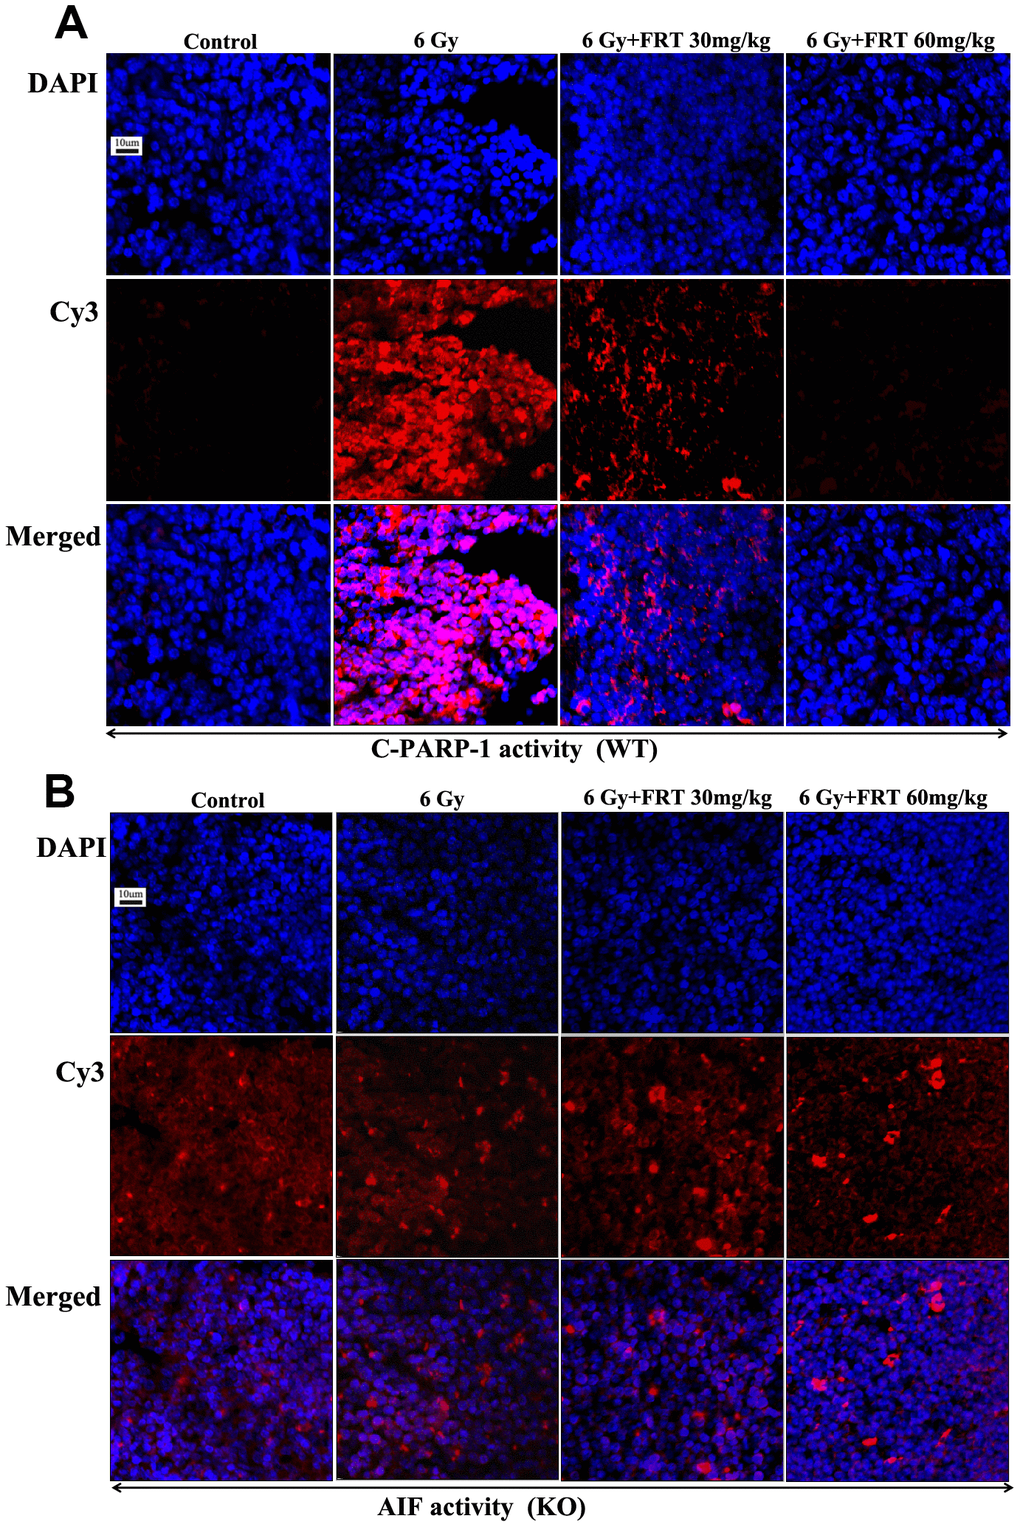 FRT played a role in radiation protection by inhibiting PARP-1 activation and reducing AIF release. (A, B) Expressions of C-PARP-1 and AIF in mouse thymus tissues measured by immunofluorescence. Paraffin-embedded specimens were sliced into sections (4 μm), stained with Cy3 labeled fluorescent secondary antibody (1:500) combined with primary antibody against specific proteins and with DAPI for nuclear staining, sealed with anti-fluorescence quencher, then observed immediately using confocal laser scanning microscopy (n=5).